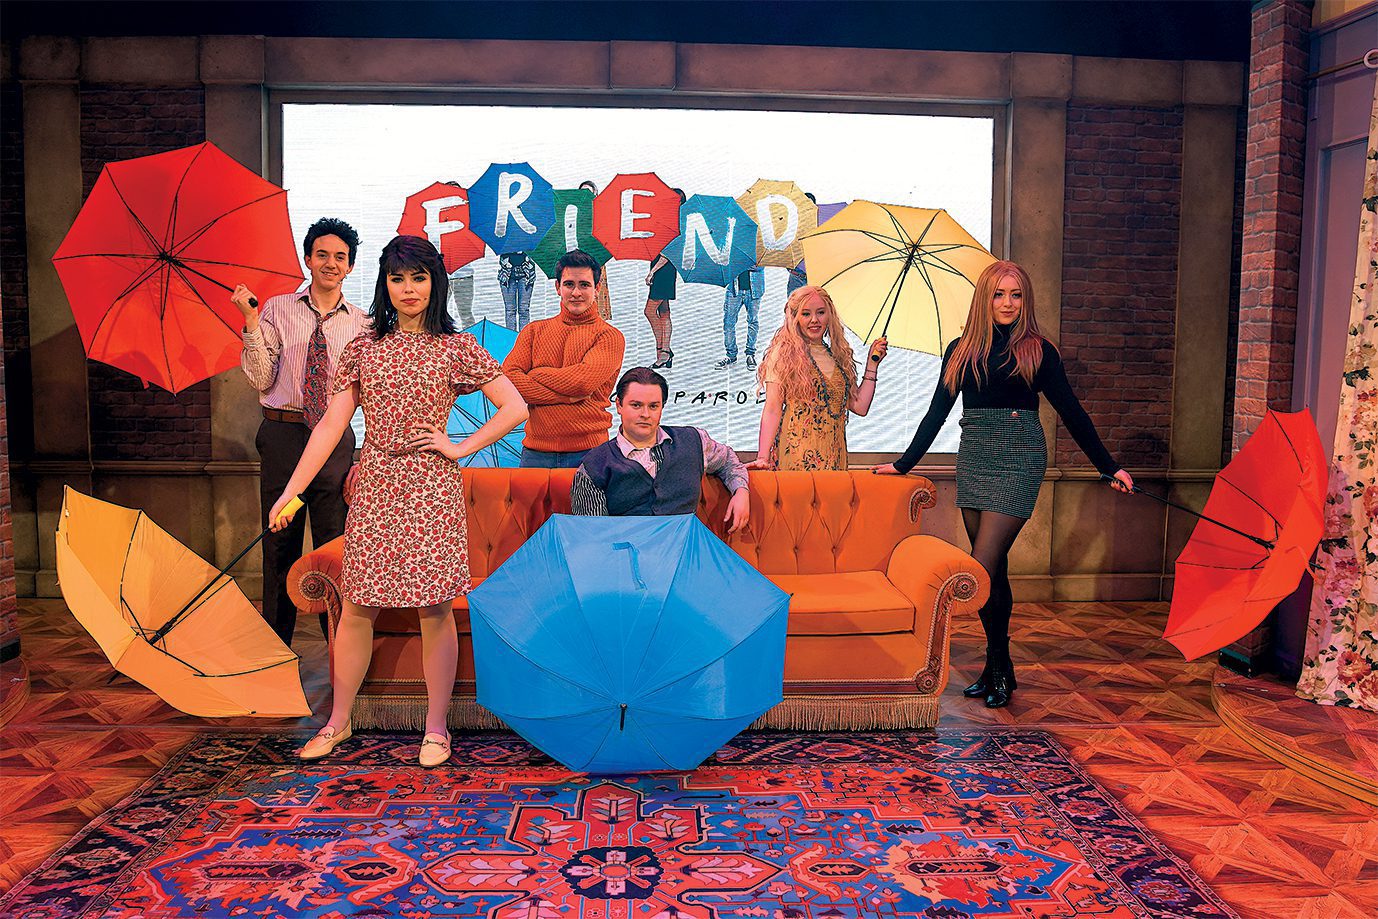 Friends The Musical Parody. The Playhouse Theatre. London